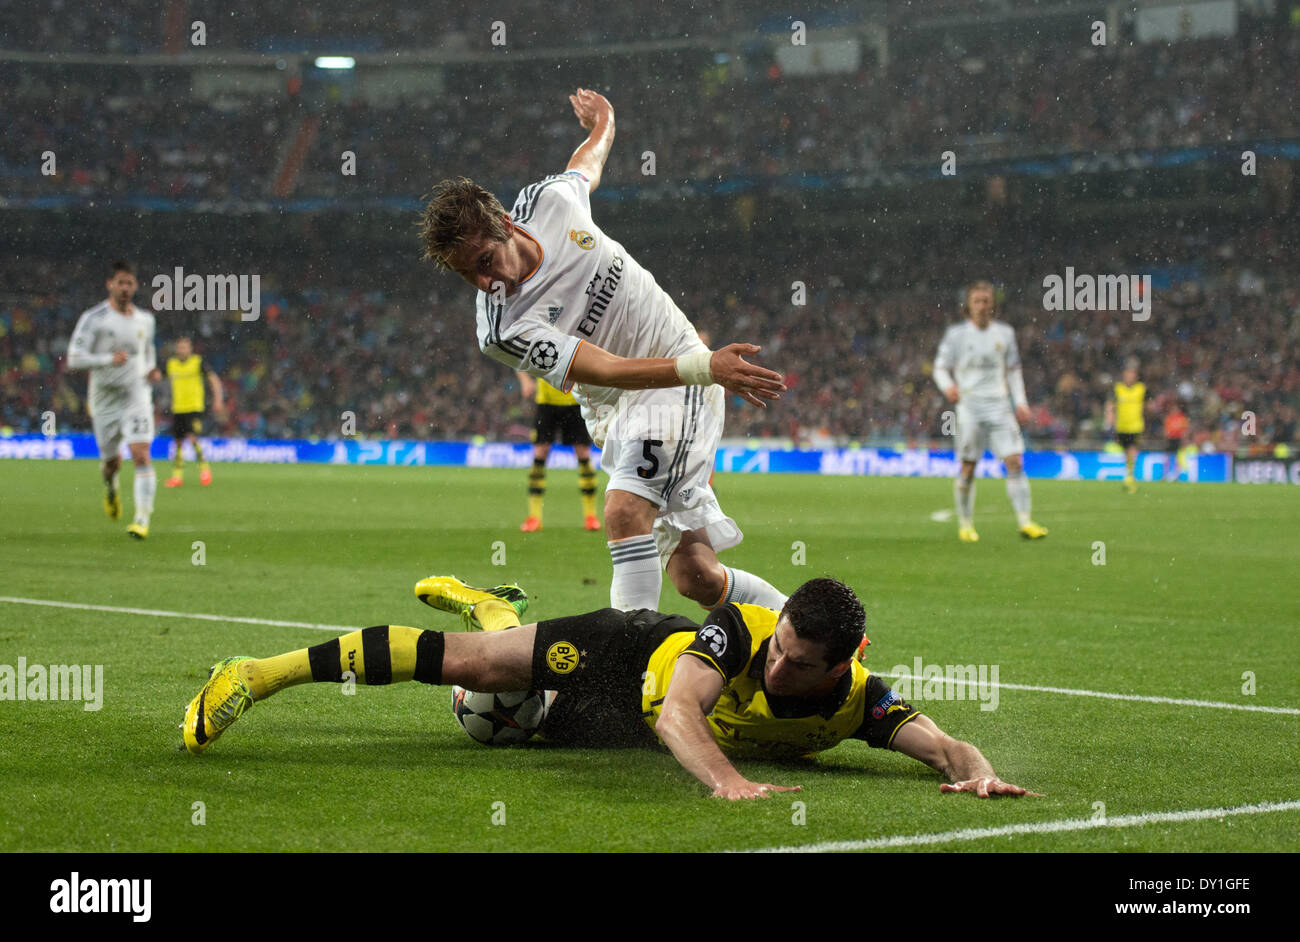 Madrid, Spain. 02nd Apr, 2014. Henrikh Mkhitaryan (FRONT) of Dortmund and Real Madrid's Fabio Coentrao vie for the ball during the UEFA Champions League quarter final first leg soccer match between Real Madrid and Borussia Dortmund at Santiago Bernabeu stadium in Madrid, Spain, 02 April 2014. Photo: Bernd Thissen/dpa/Alamy Live News Stock Photo